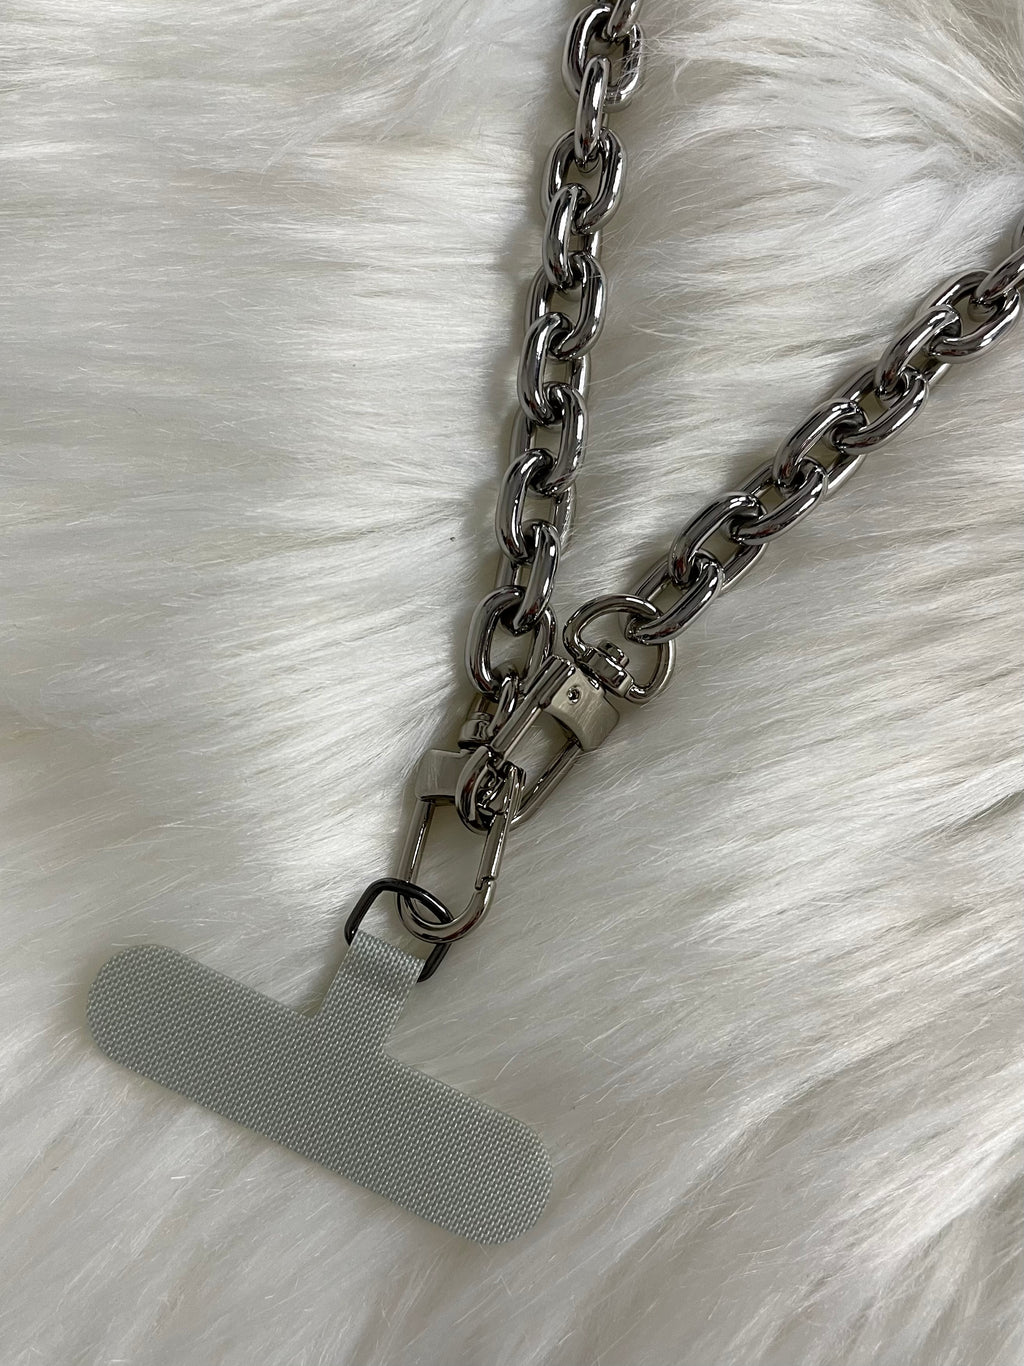 Cell Phone Simple Chain Strap Long Silver